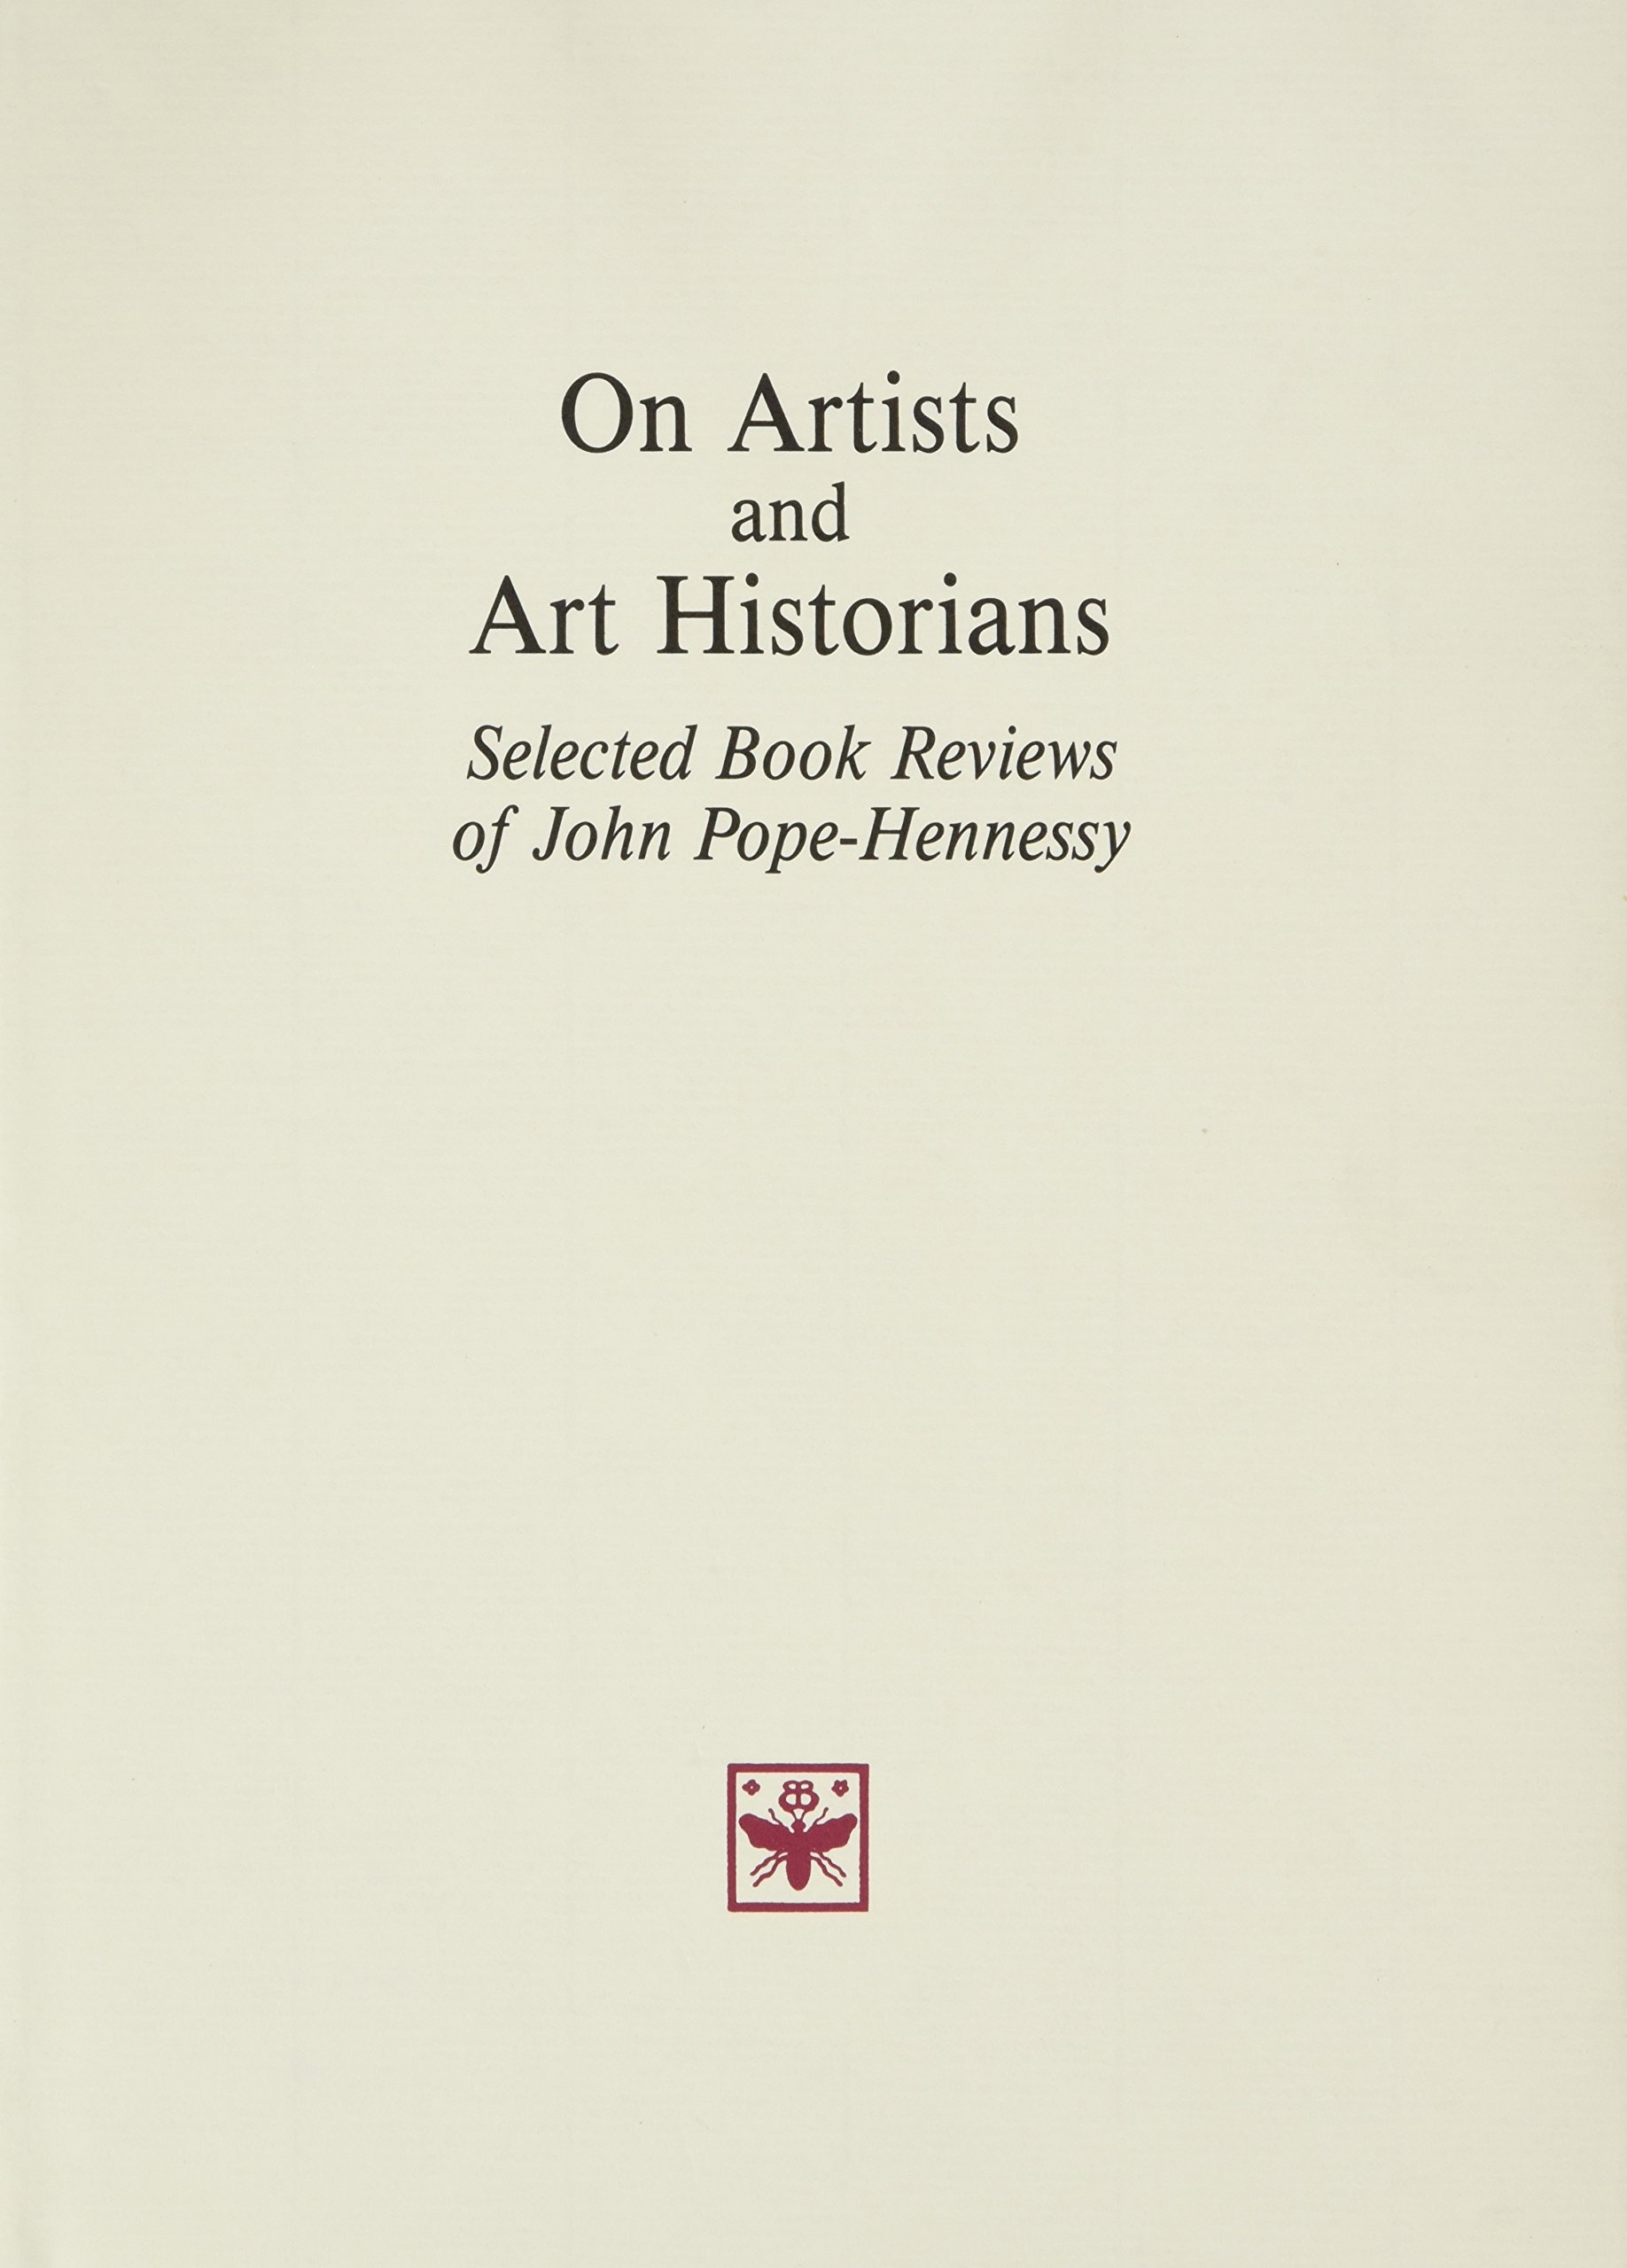 On Artists and Art Historians: Selected Book Reviews of John Pope-Hennessy